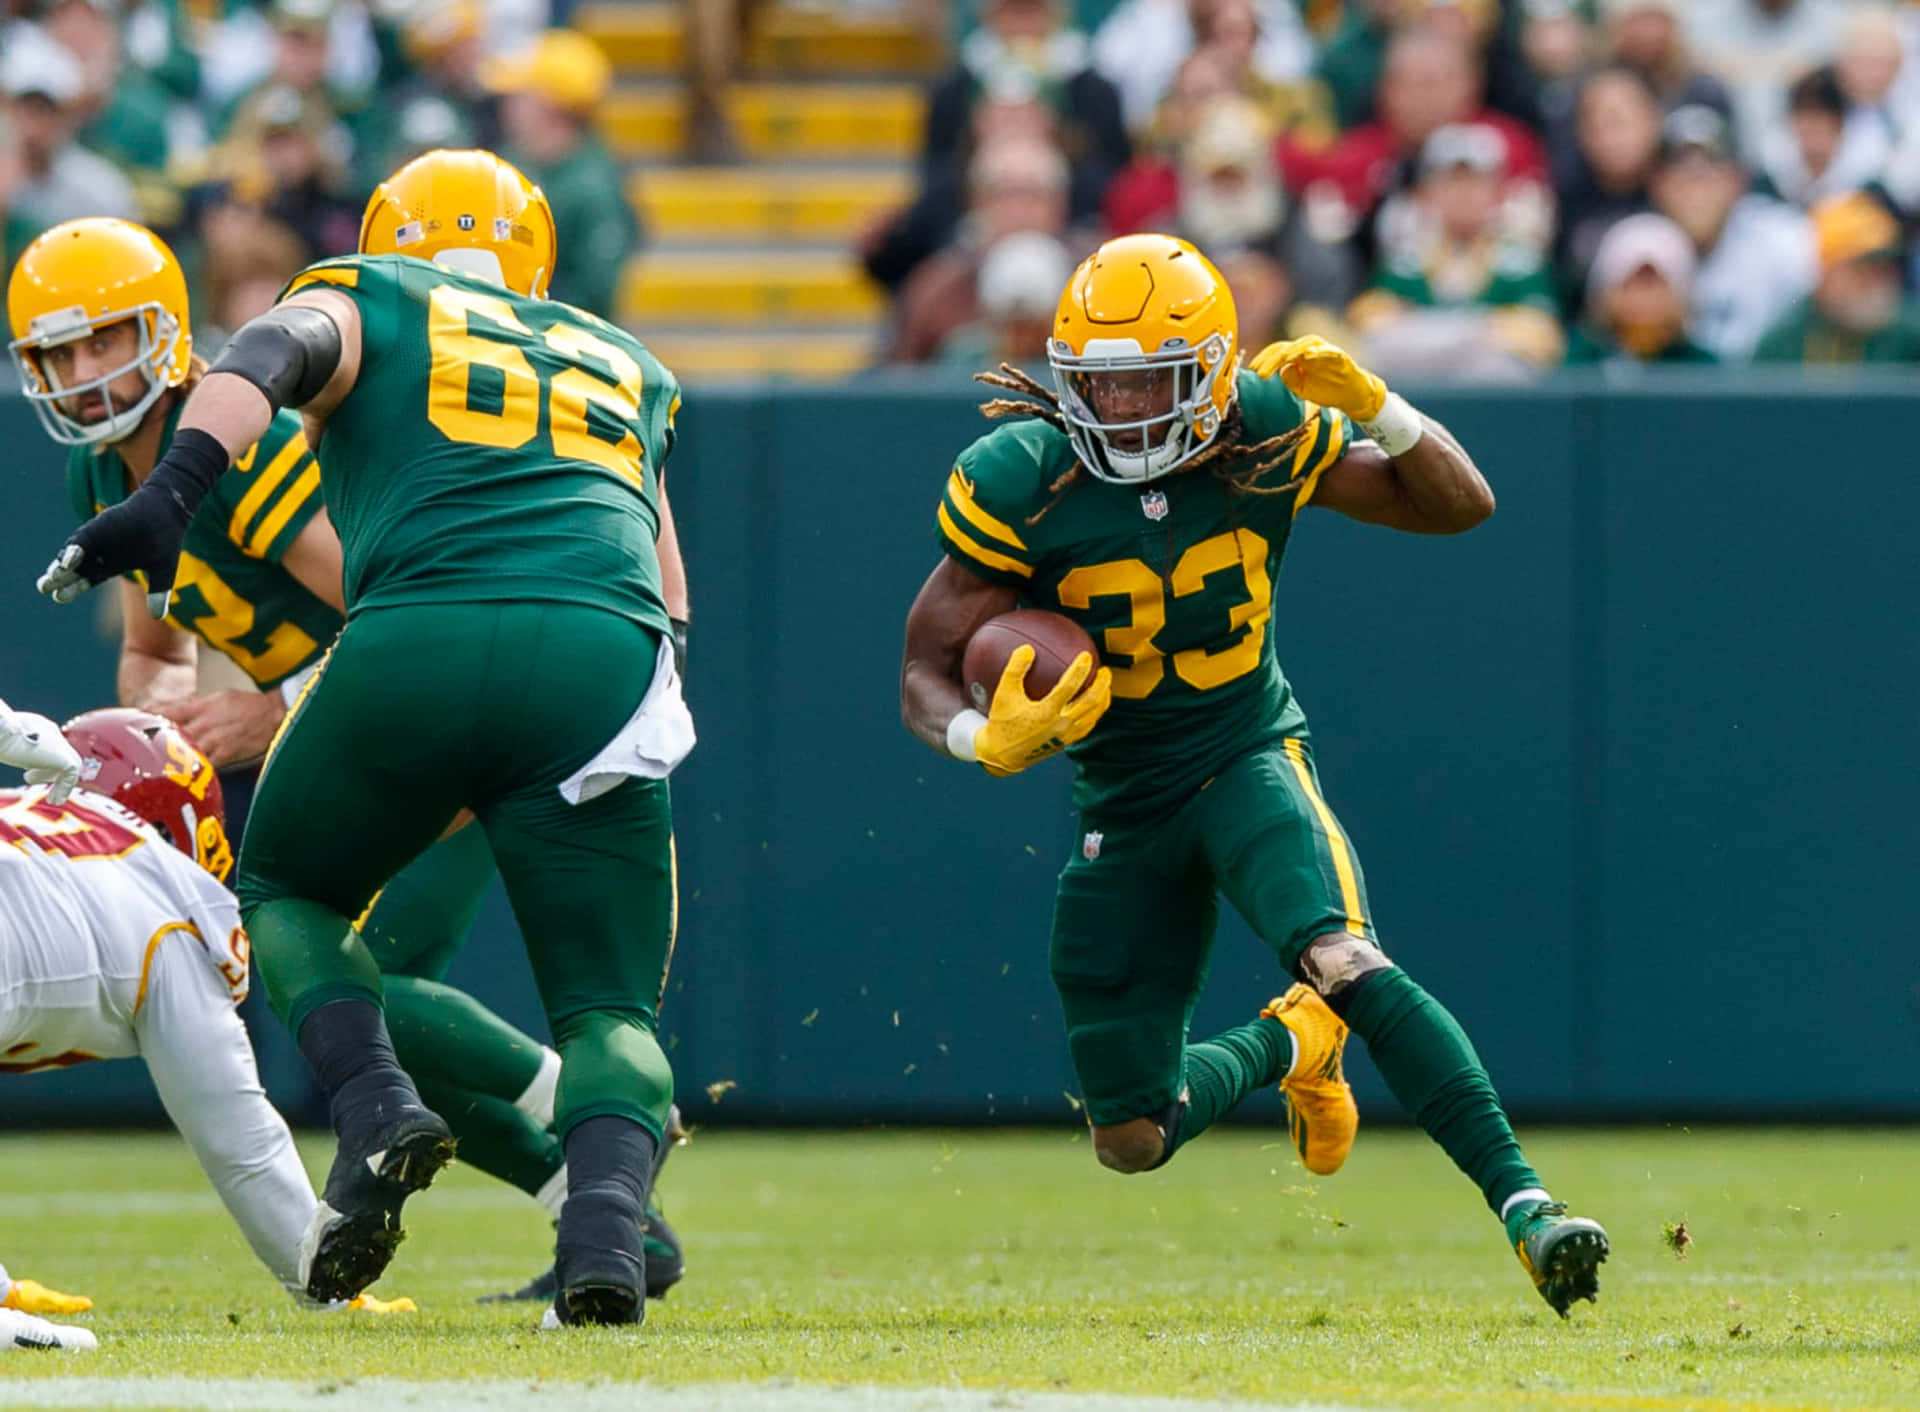 Aaron Jones of the Green Bay Packers running the ball down the field. Wallpaper